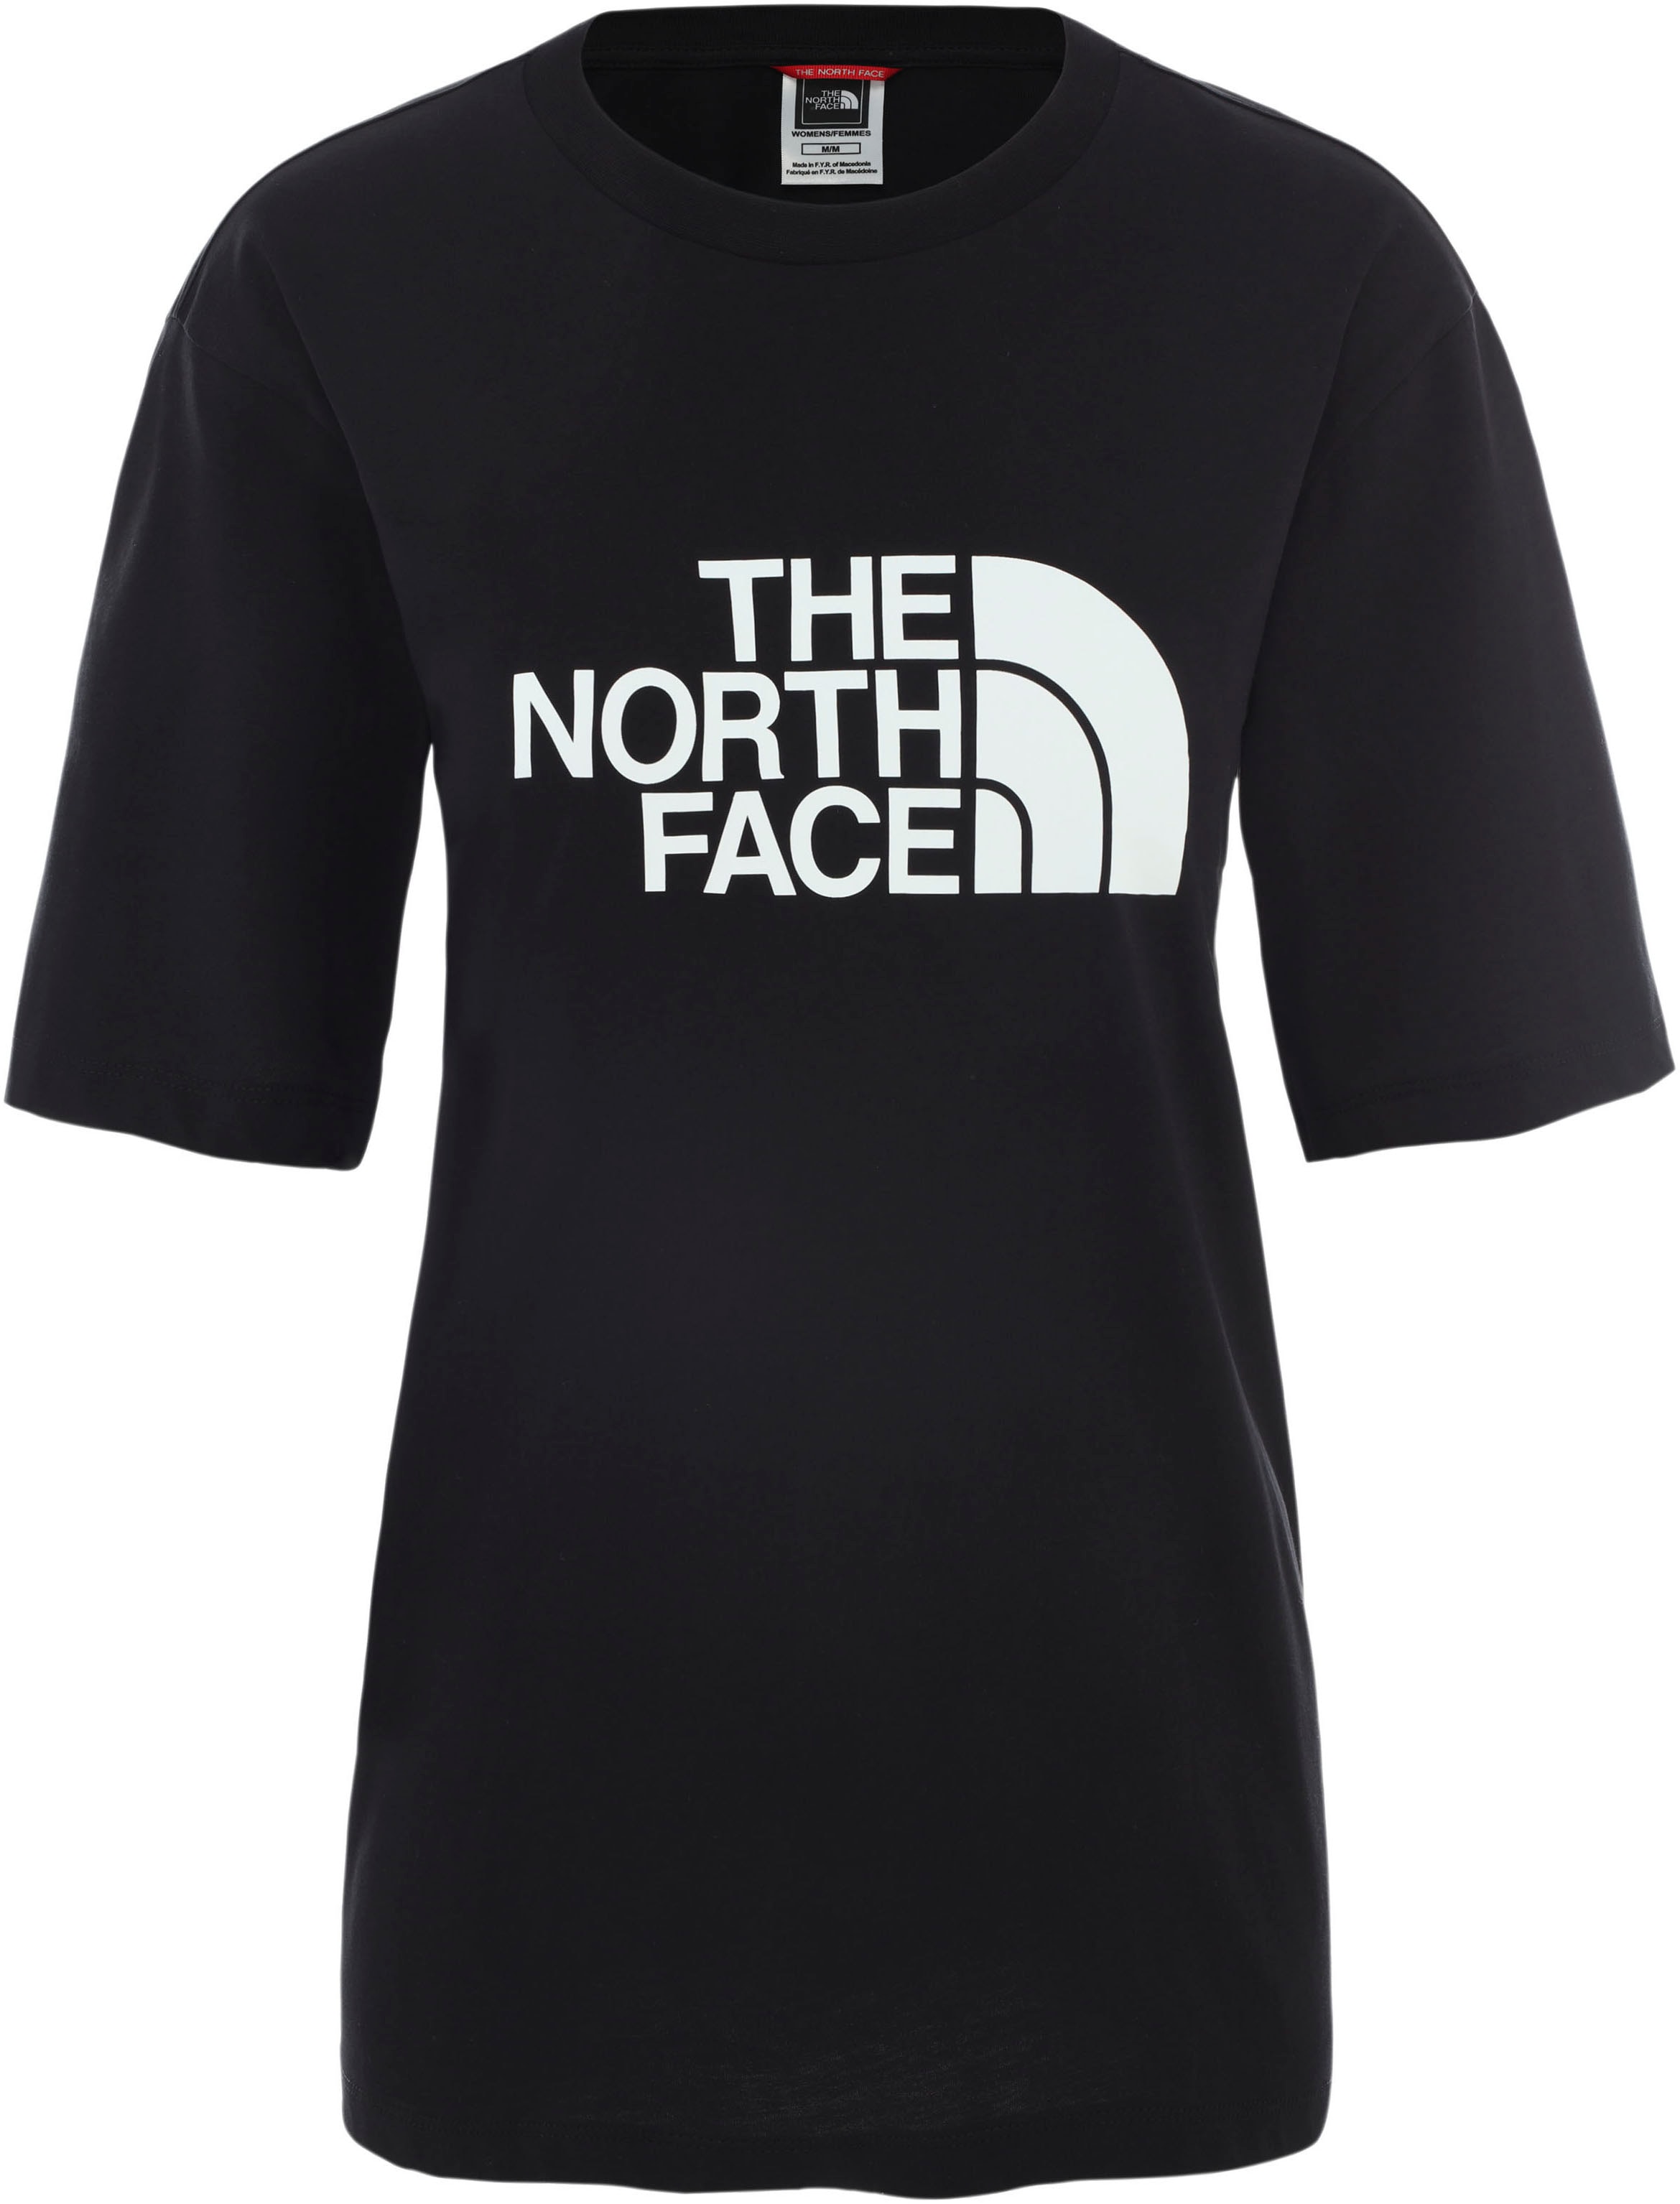 THE NORTH FACE Relaxed Easy T-Shirt Black S